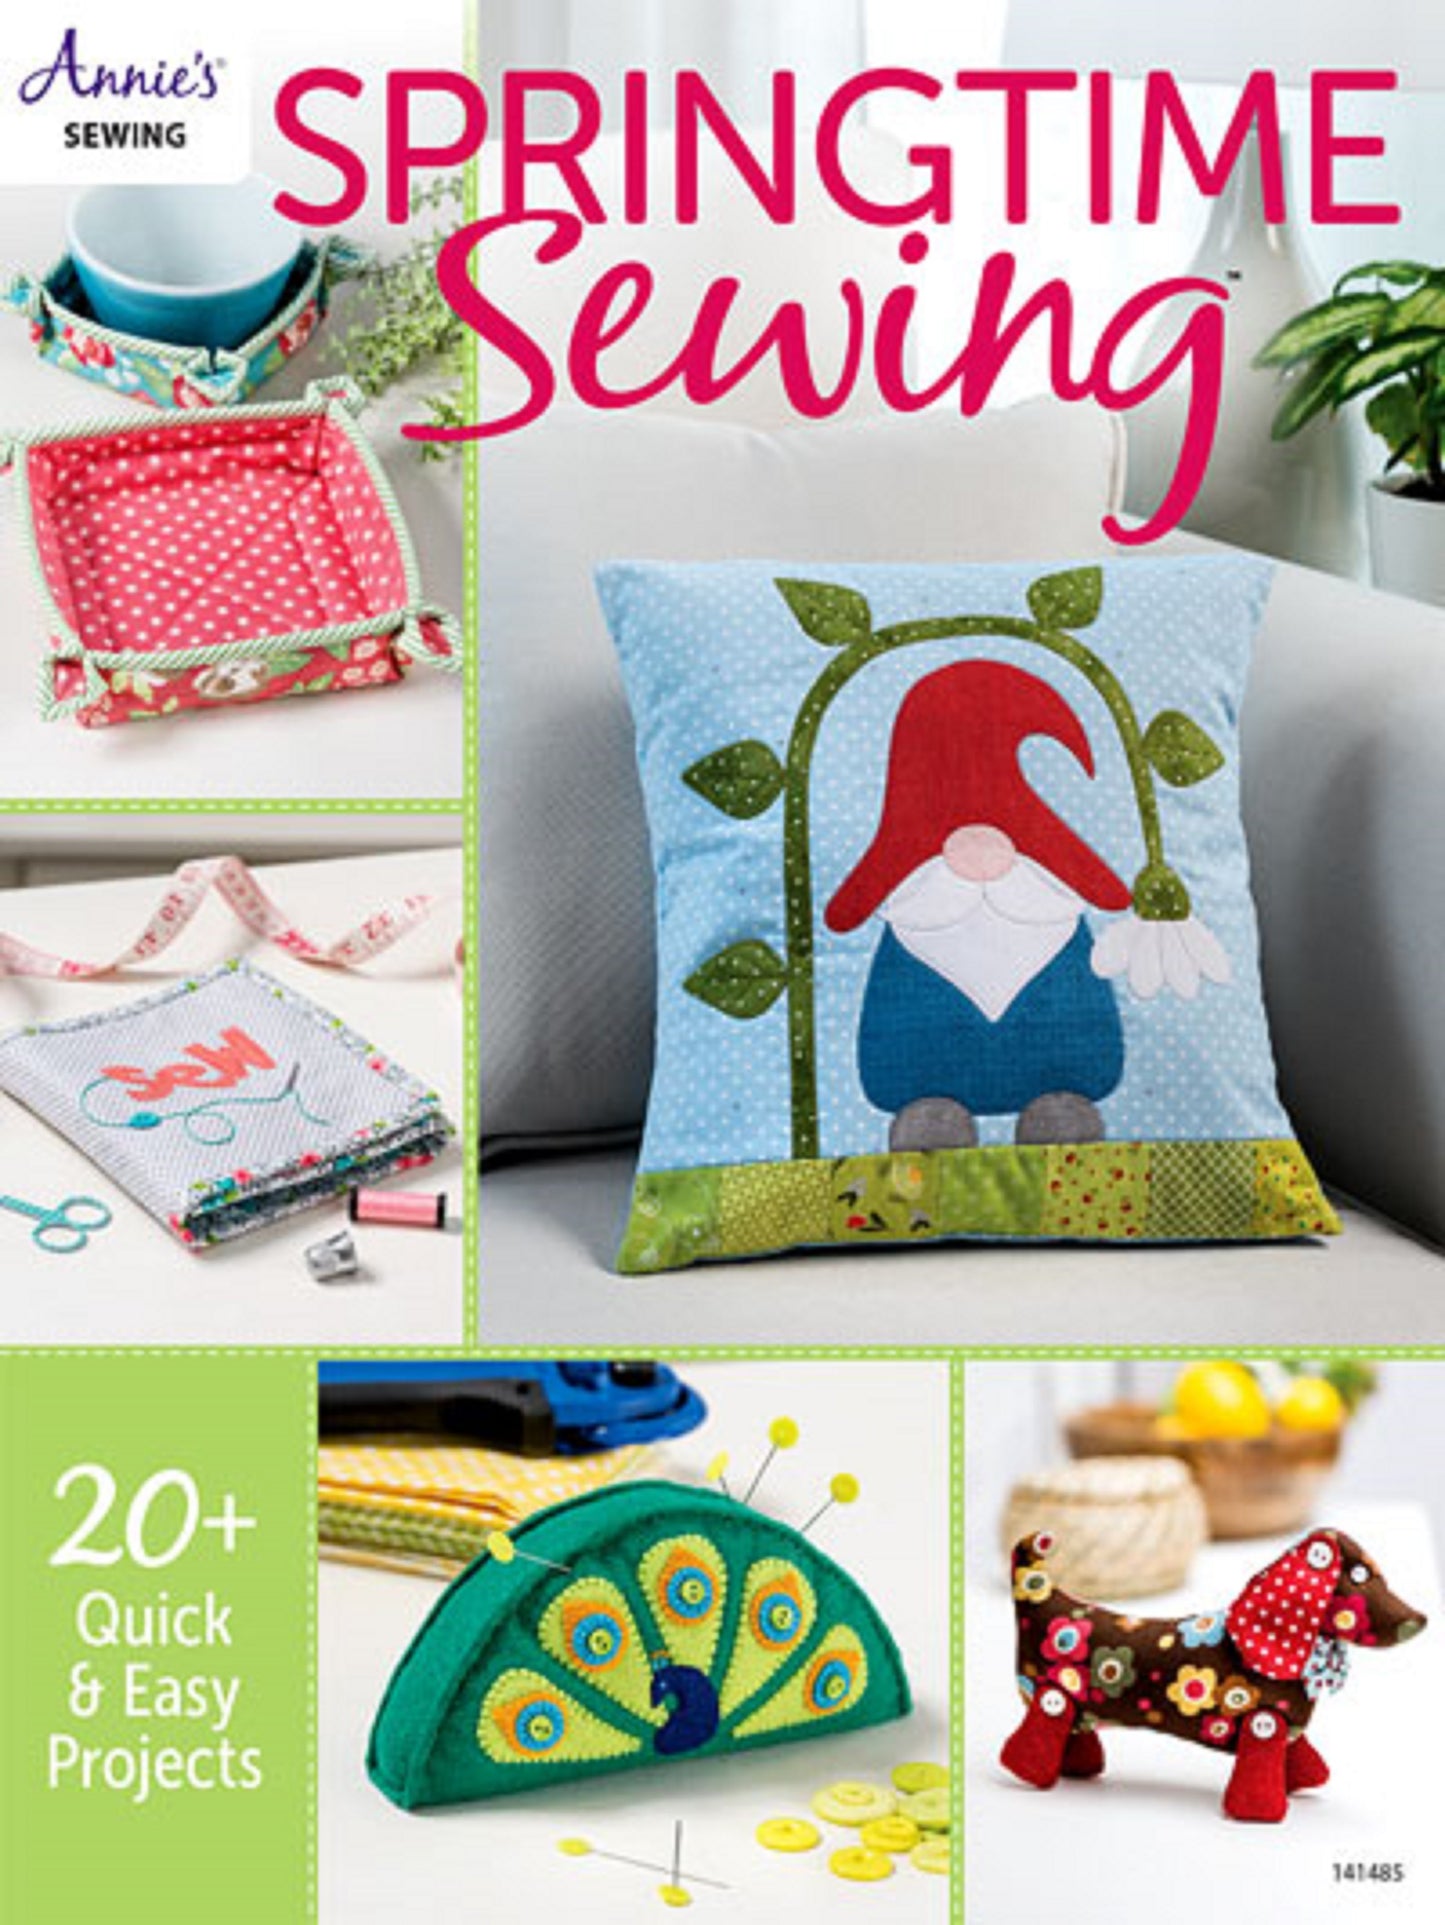 Annie's Springtime Sewing-20 + Projects to Sew for Spring